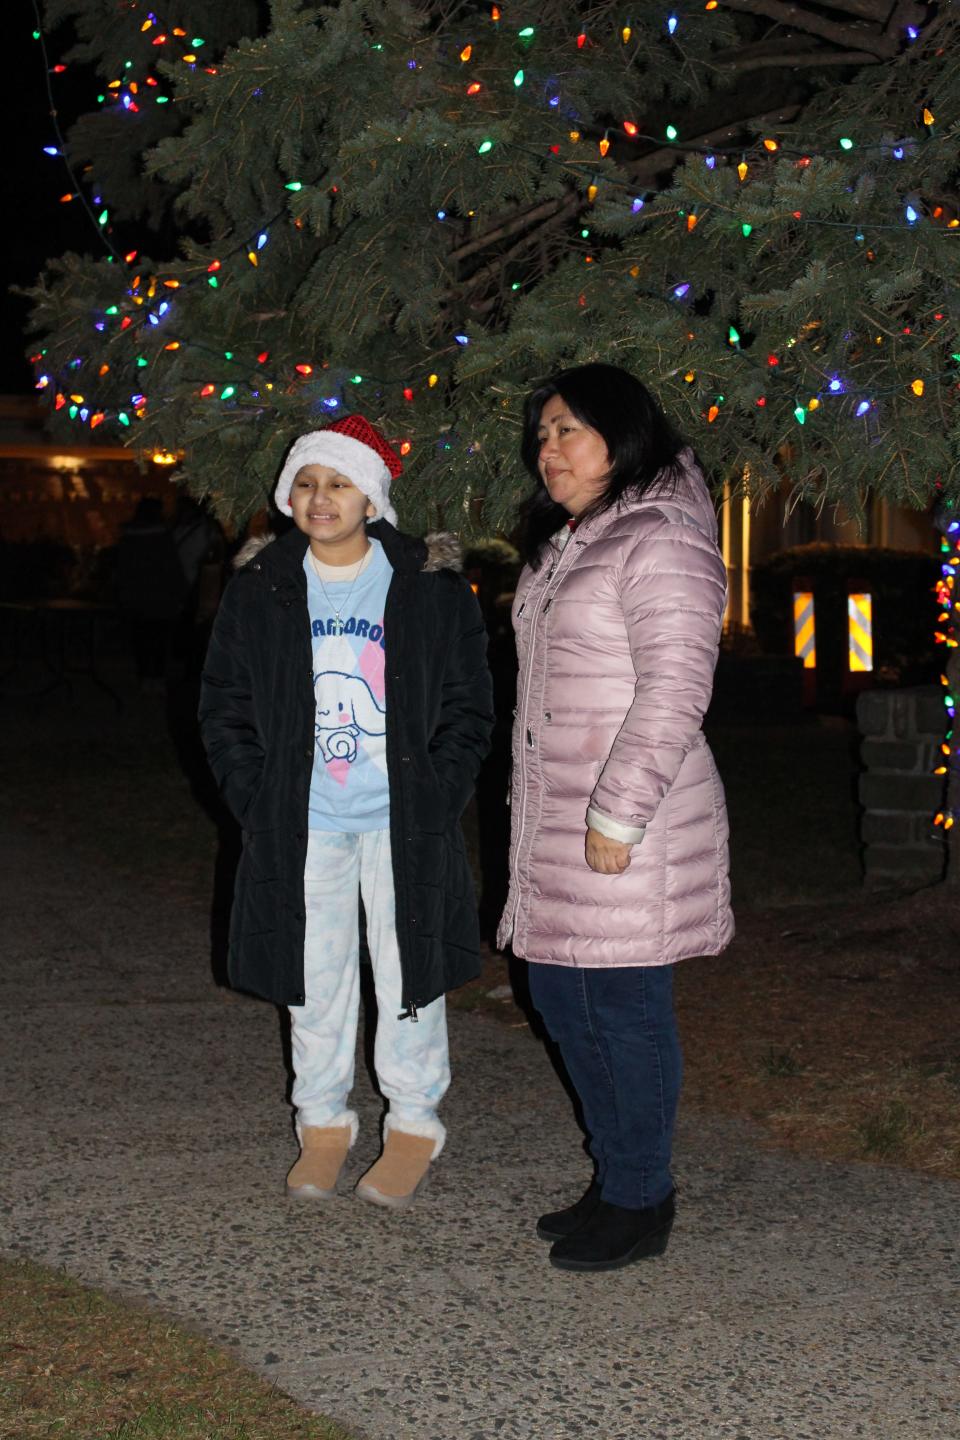 Myra Cacsire, 11, and her mother Patricia at a Christmas tree lighting held in her honor at Our Lady of Sorrows School in White Plains.